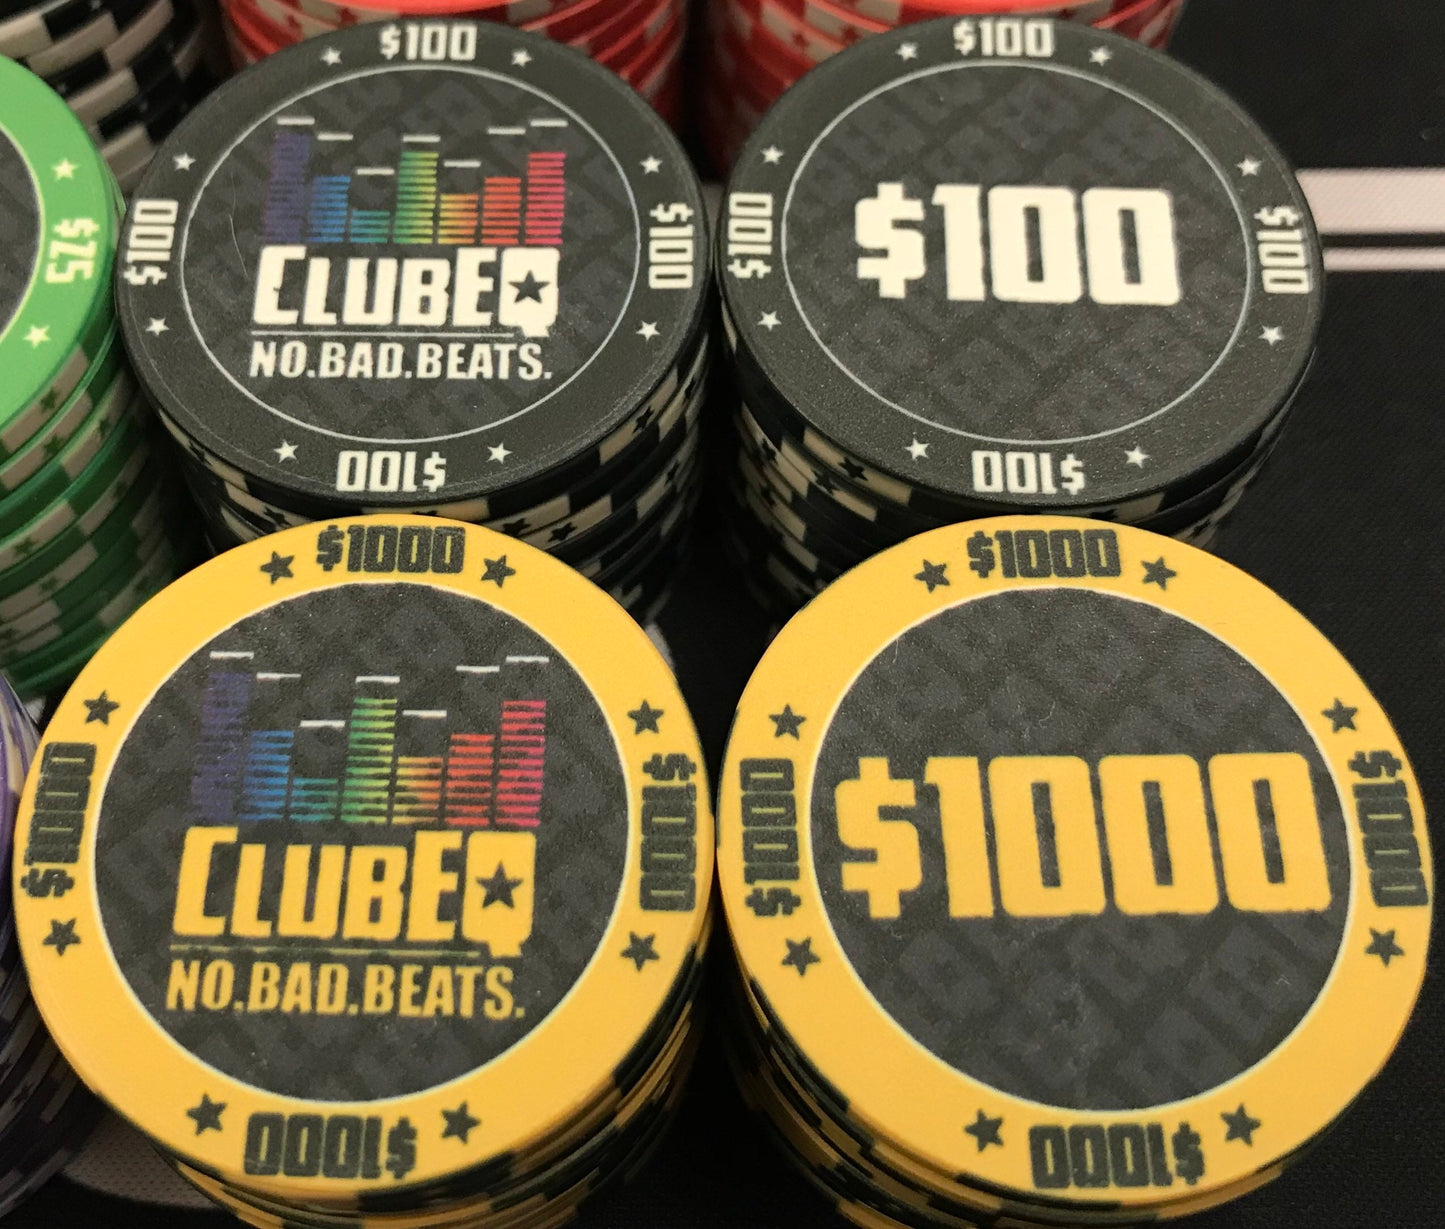 Here we see the one hundred dollar ($100) and one thousand dollar ($1000) ClubEQ poker chips in black and yellow, respectively. The ClubEQ logo resembles a lighted EQ band. On the other side of each chip is the denomination in the same color as the poker chip.